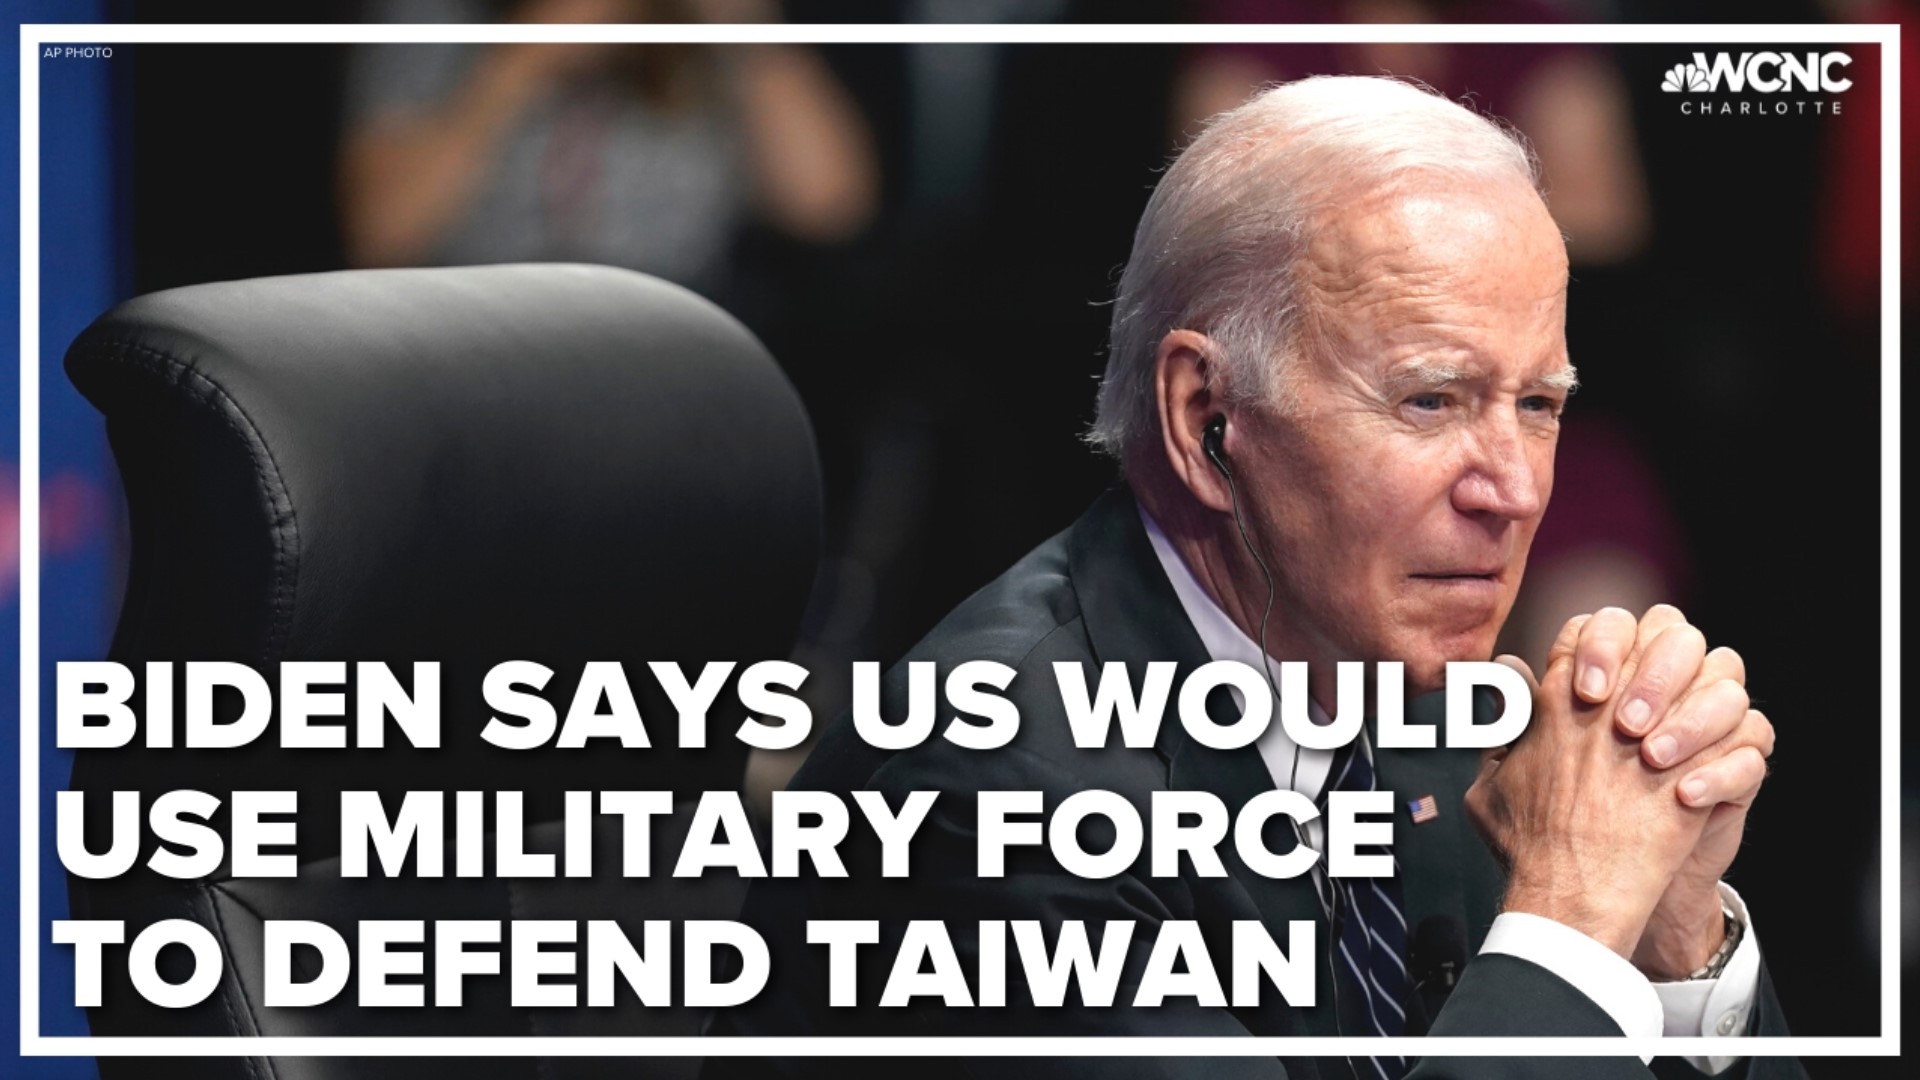 China has stepped up its military provocations against democratic Taiwan in recent years aimed at intimidating it into accepting Beijing's demands to unify.